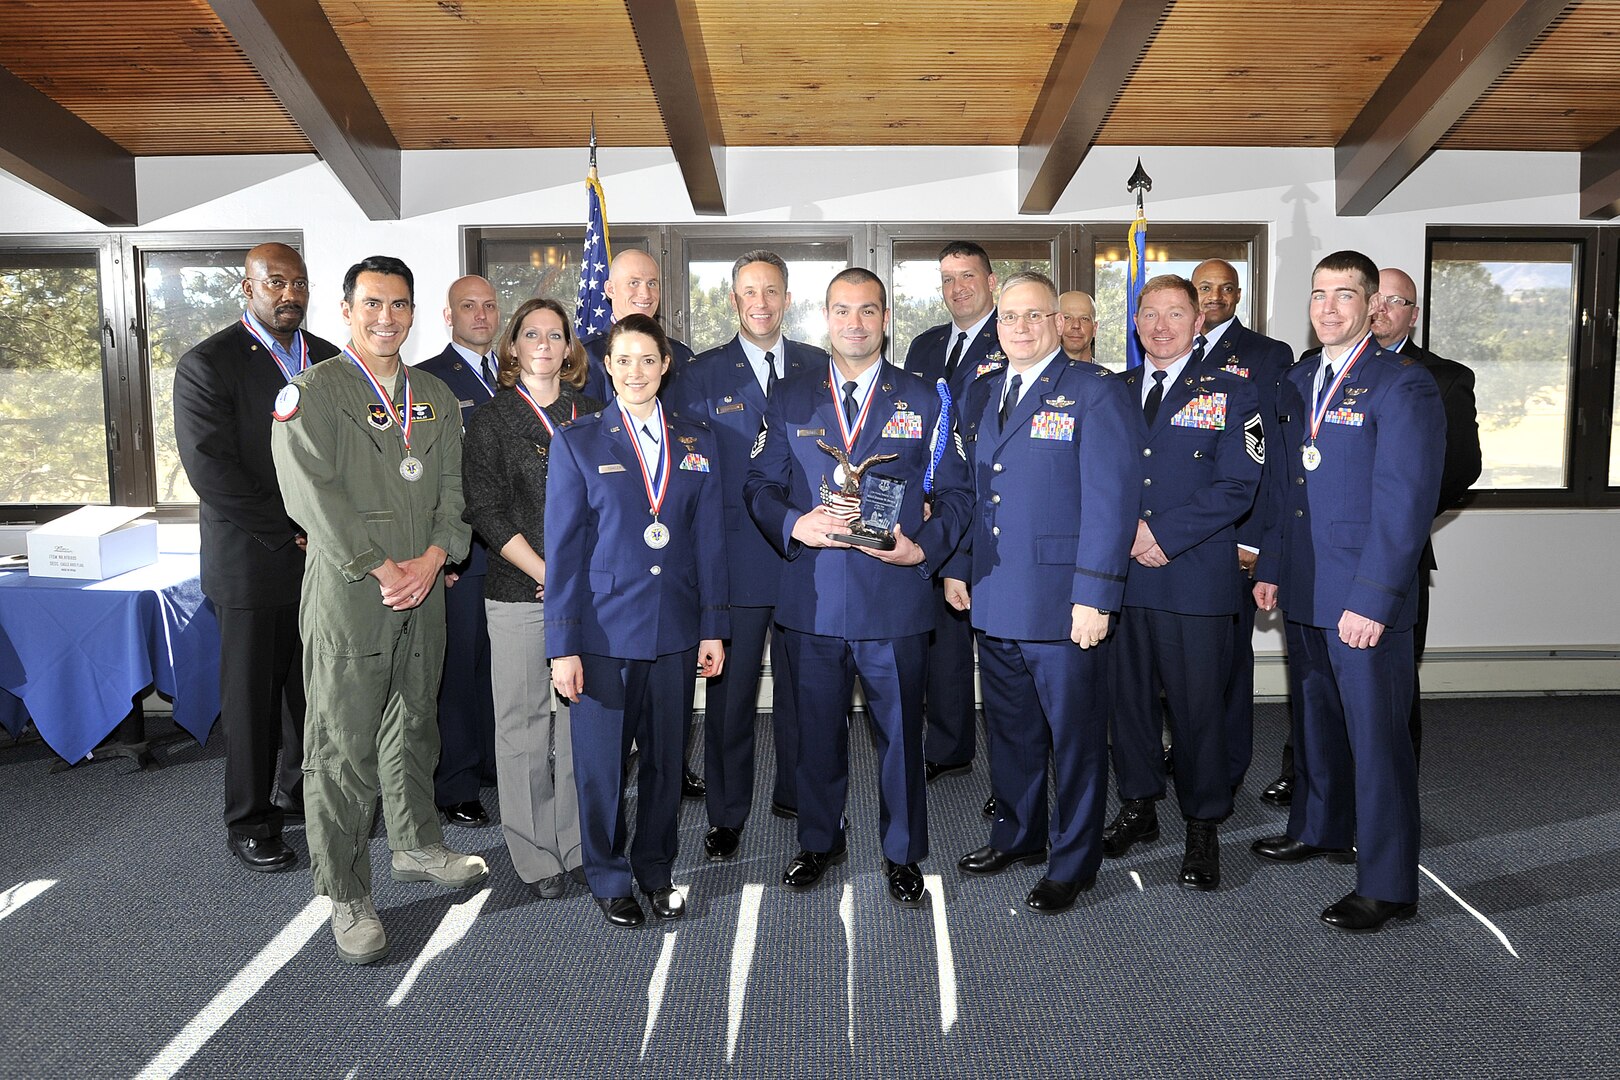 Annual award nominees from the 12th Flying Training WIng's 306th Flying Training Group pose for a photo with 12th FTW leadership after the ceremony at the U.S. Air Force Academy, Colo., January 28, 2013.  Due to its geographically separated nature, members of the wing's 306th and 479th Flying Training Groups were not able to attend the wing's formal banquet held at Joint Base San Antonio-Randolph, Texas January 25.  Instead they were honored at individual events at their respective home stations, the U.S. Air Force Academy, Colo., and Naval Air Station Pensacola, Fla. on January 28 and 29.  Typically all nominees are sent TDY to the ceremony, but having separate events saved the wing nearly $30,000.